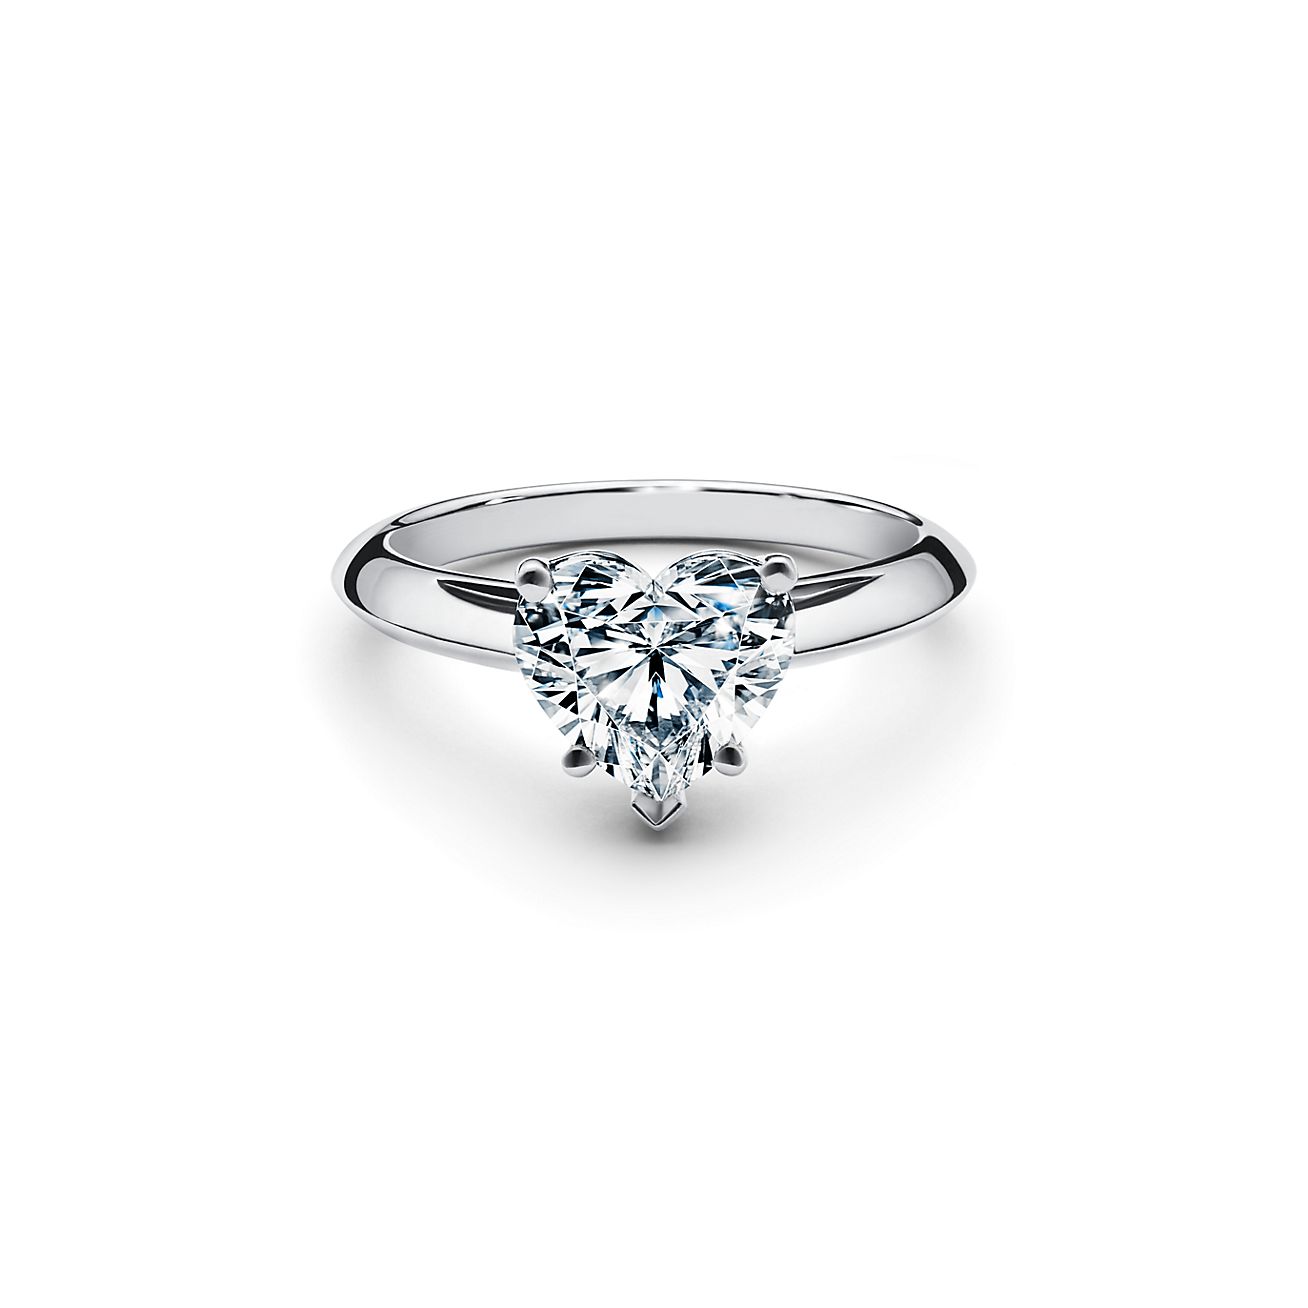 Heart-shaped diamond engagement ring in 